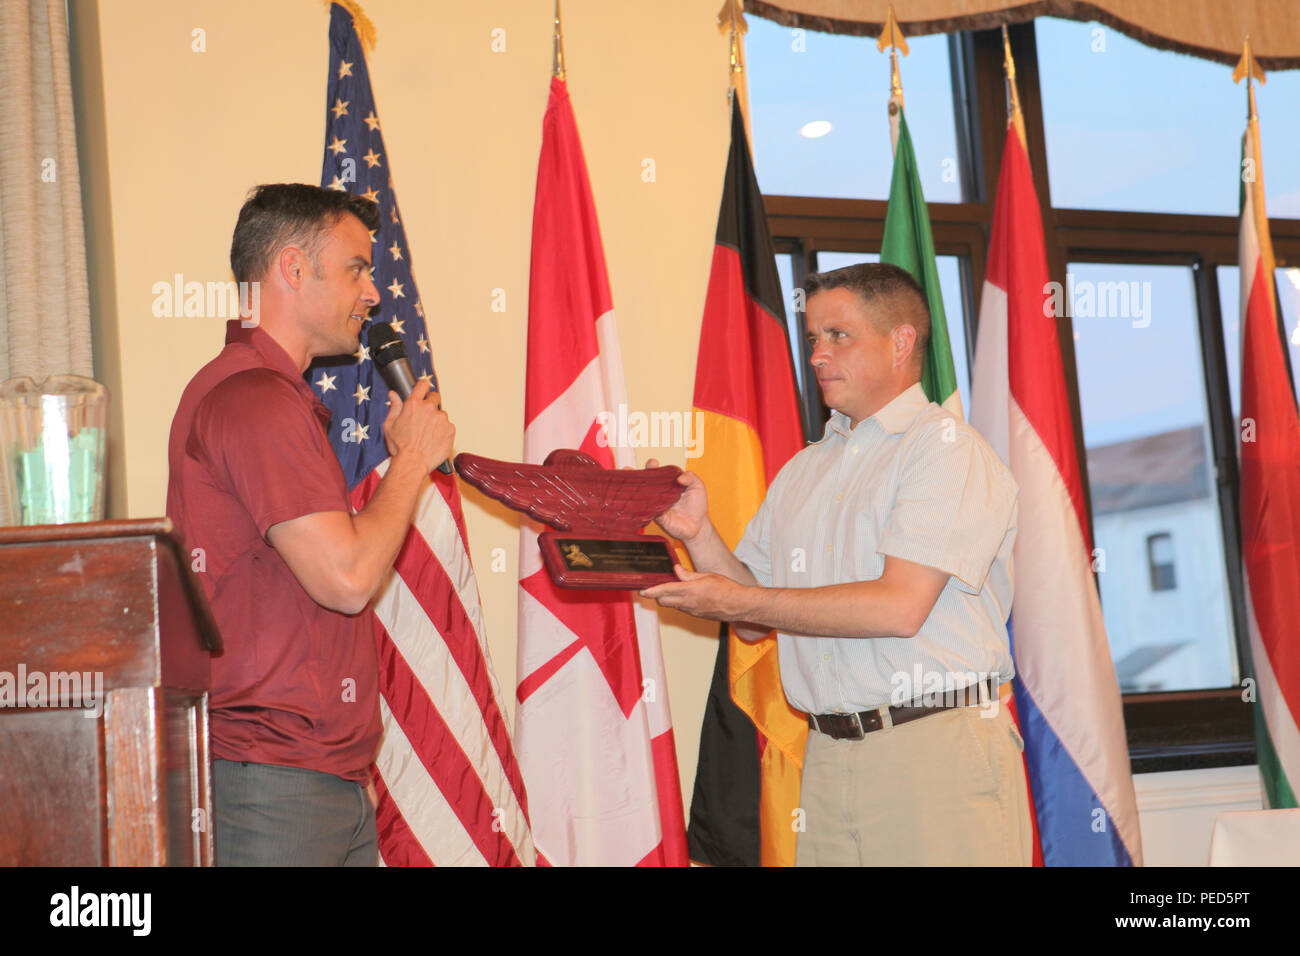 Canadian Capt. Noel Mark from the 3rd Battalion, Royal 22nd Regiment presents a gift of Canadian wings to U.S. Army Lt. Col. David Neary, Acting Brigade Commander of the 56th Troop Command, R.I. National Guard during the awards ceremony, Aug. 1, 2015. Leapfest is an International parachute competition hosted by the 56th Troop Command, Rhode Island National Guard to promote high level technical training and esprit de corps within the International Airborne community. (U.S. Army Photo by Sgt. 1st Class Horace Murray/ Released) Stock Photo